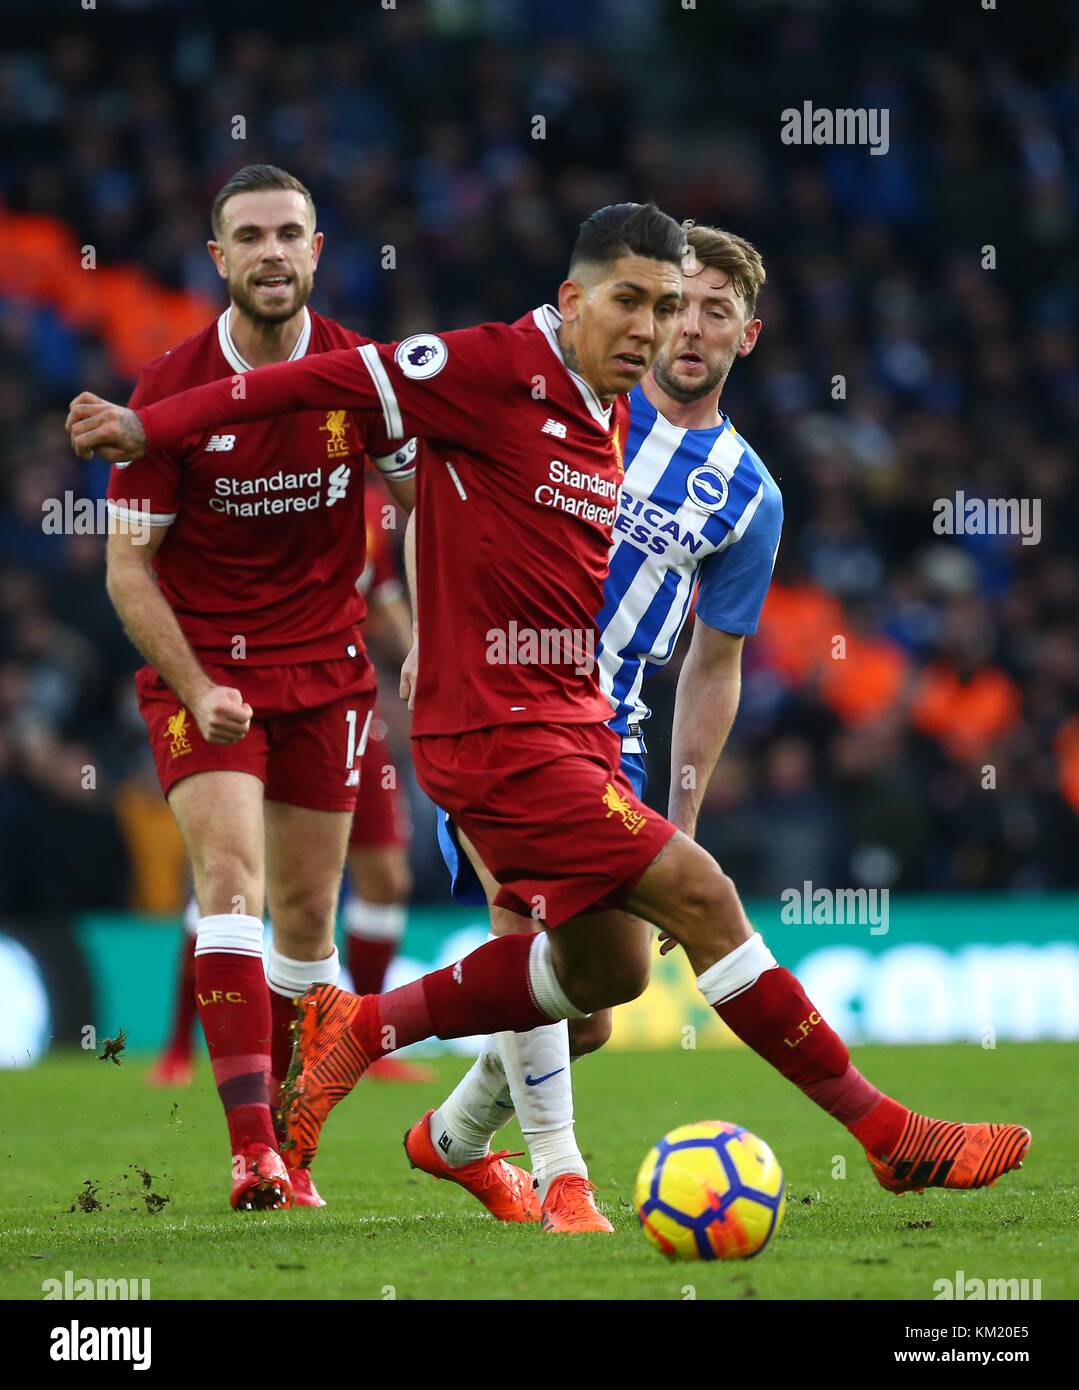 Roberto Firmino of Liverpool during the Premier League match between Brighton and Hove Albion and Liverpool at the American Express Community Stadium in Brighton and Hove. 02 Dec 2017 *** EDITORIAL USE ONLY *** FA Premier League and Football League images are subject to DataCo Licence see www.football-dataco.com Stock Photo